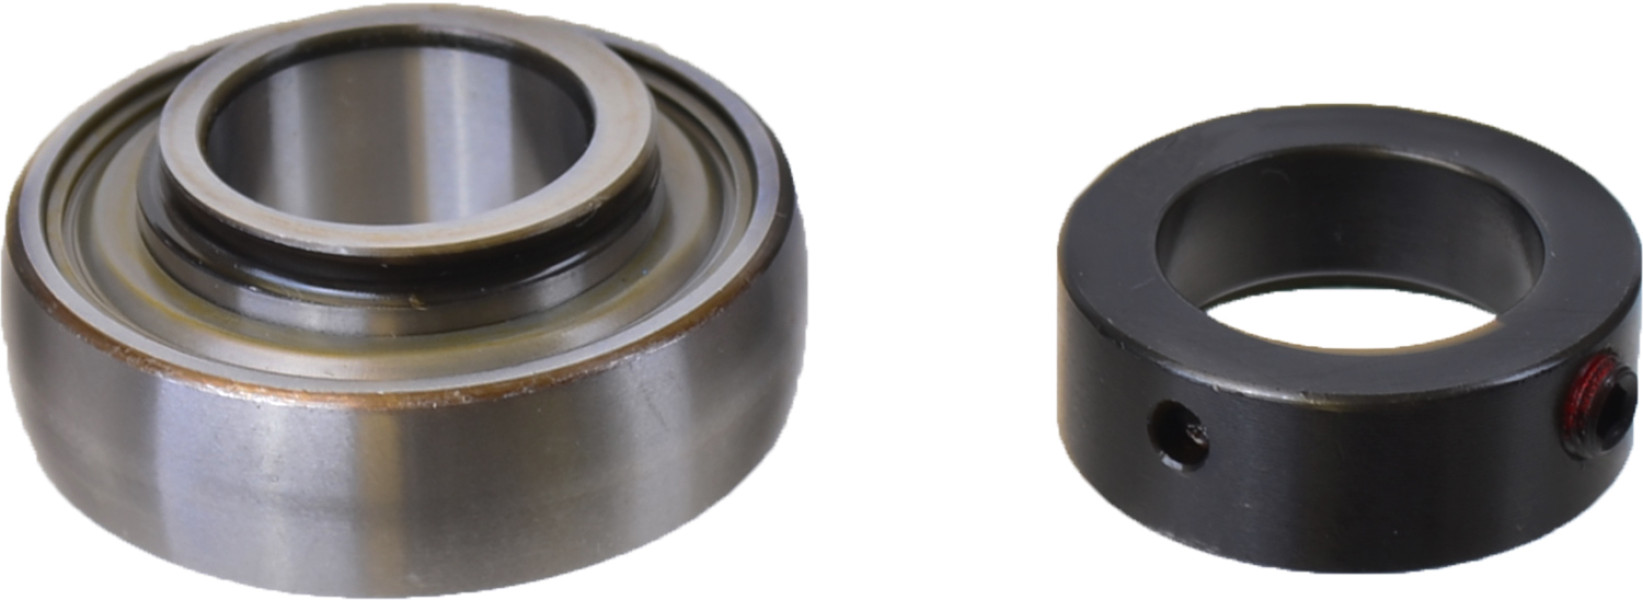 Image of Adapter Bearing from SKF. Part number: SKF-RA102-RRB